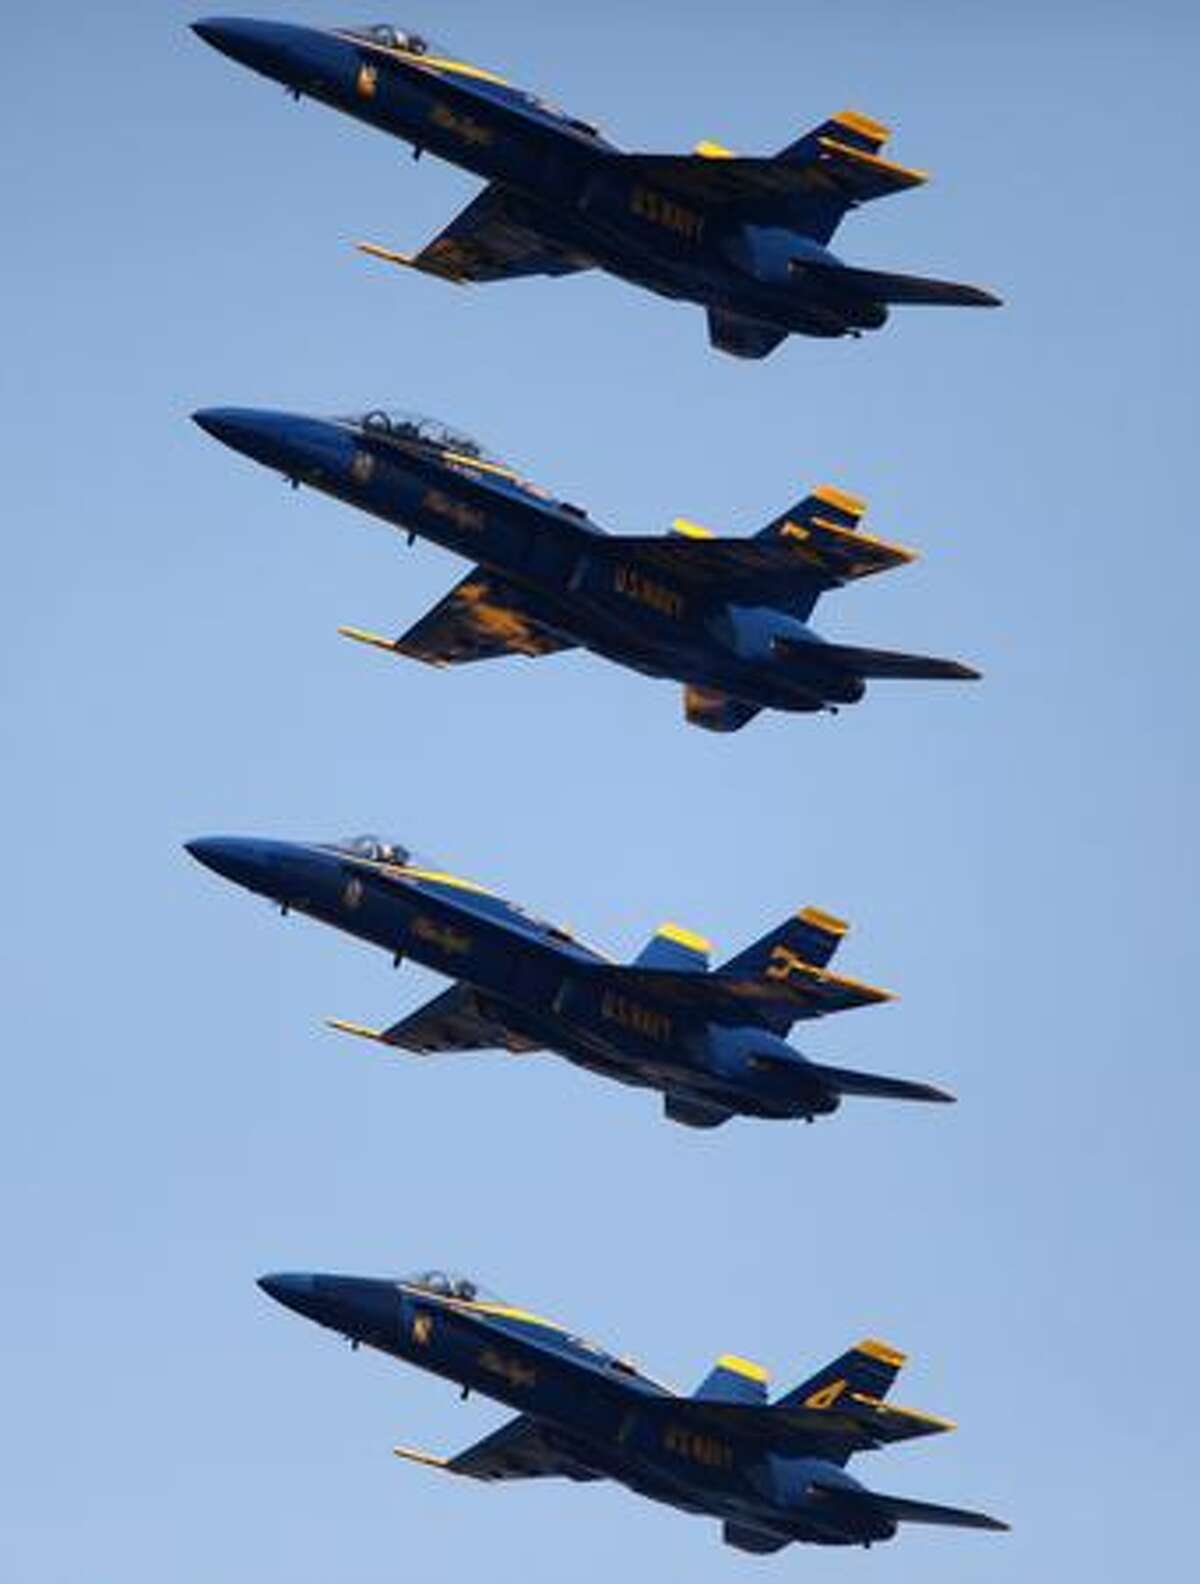 The U.S. Navy Blue Angels demonstration team fly their Boeing F/A-18 Hornets over Lake Washington during a practice on Thursday in Seattle.